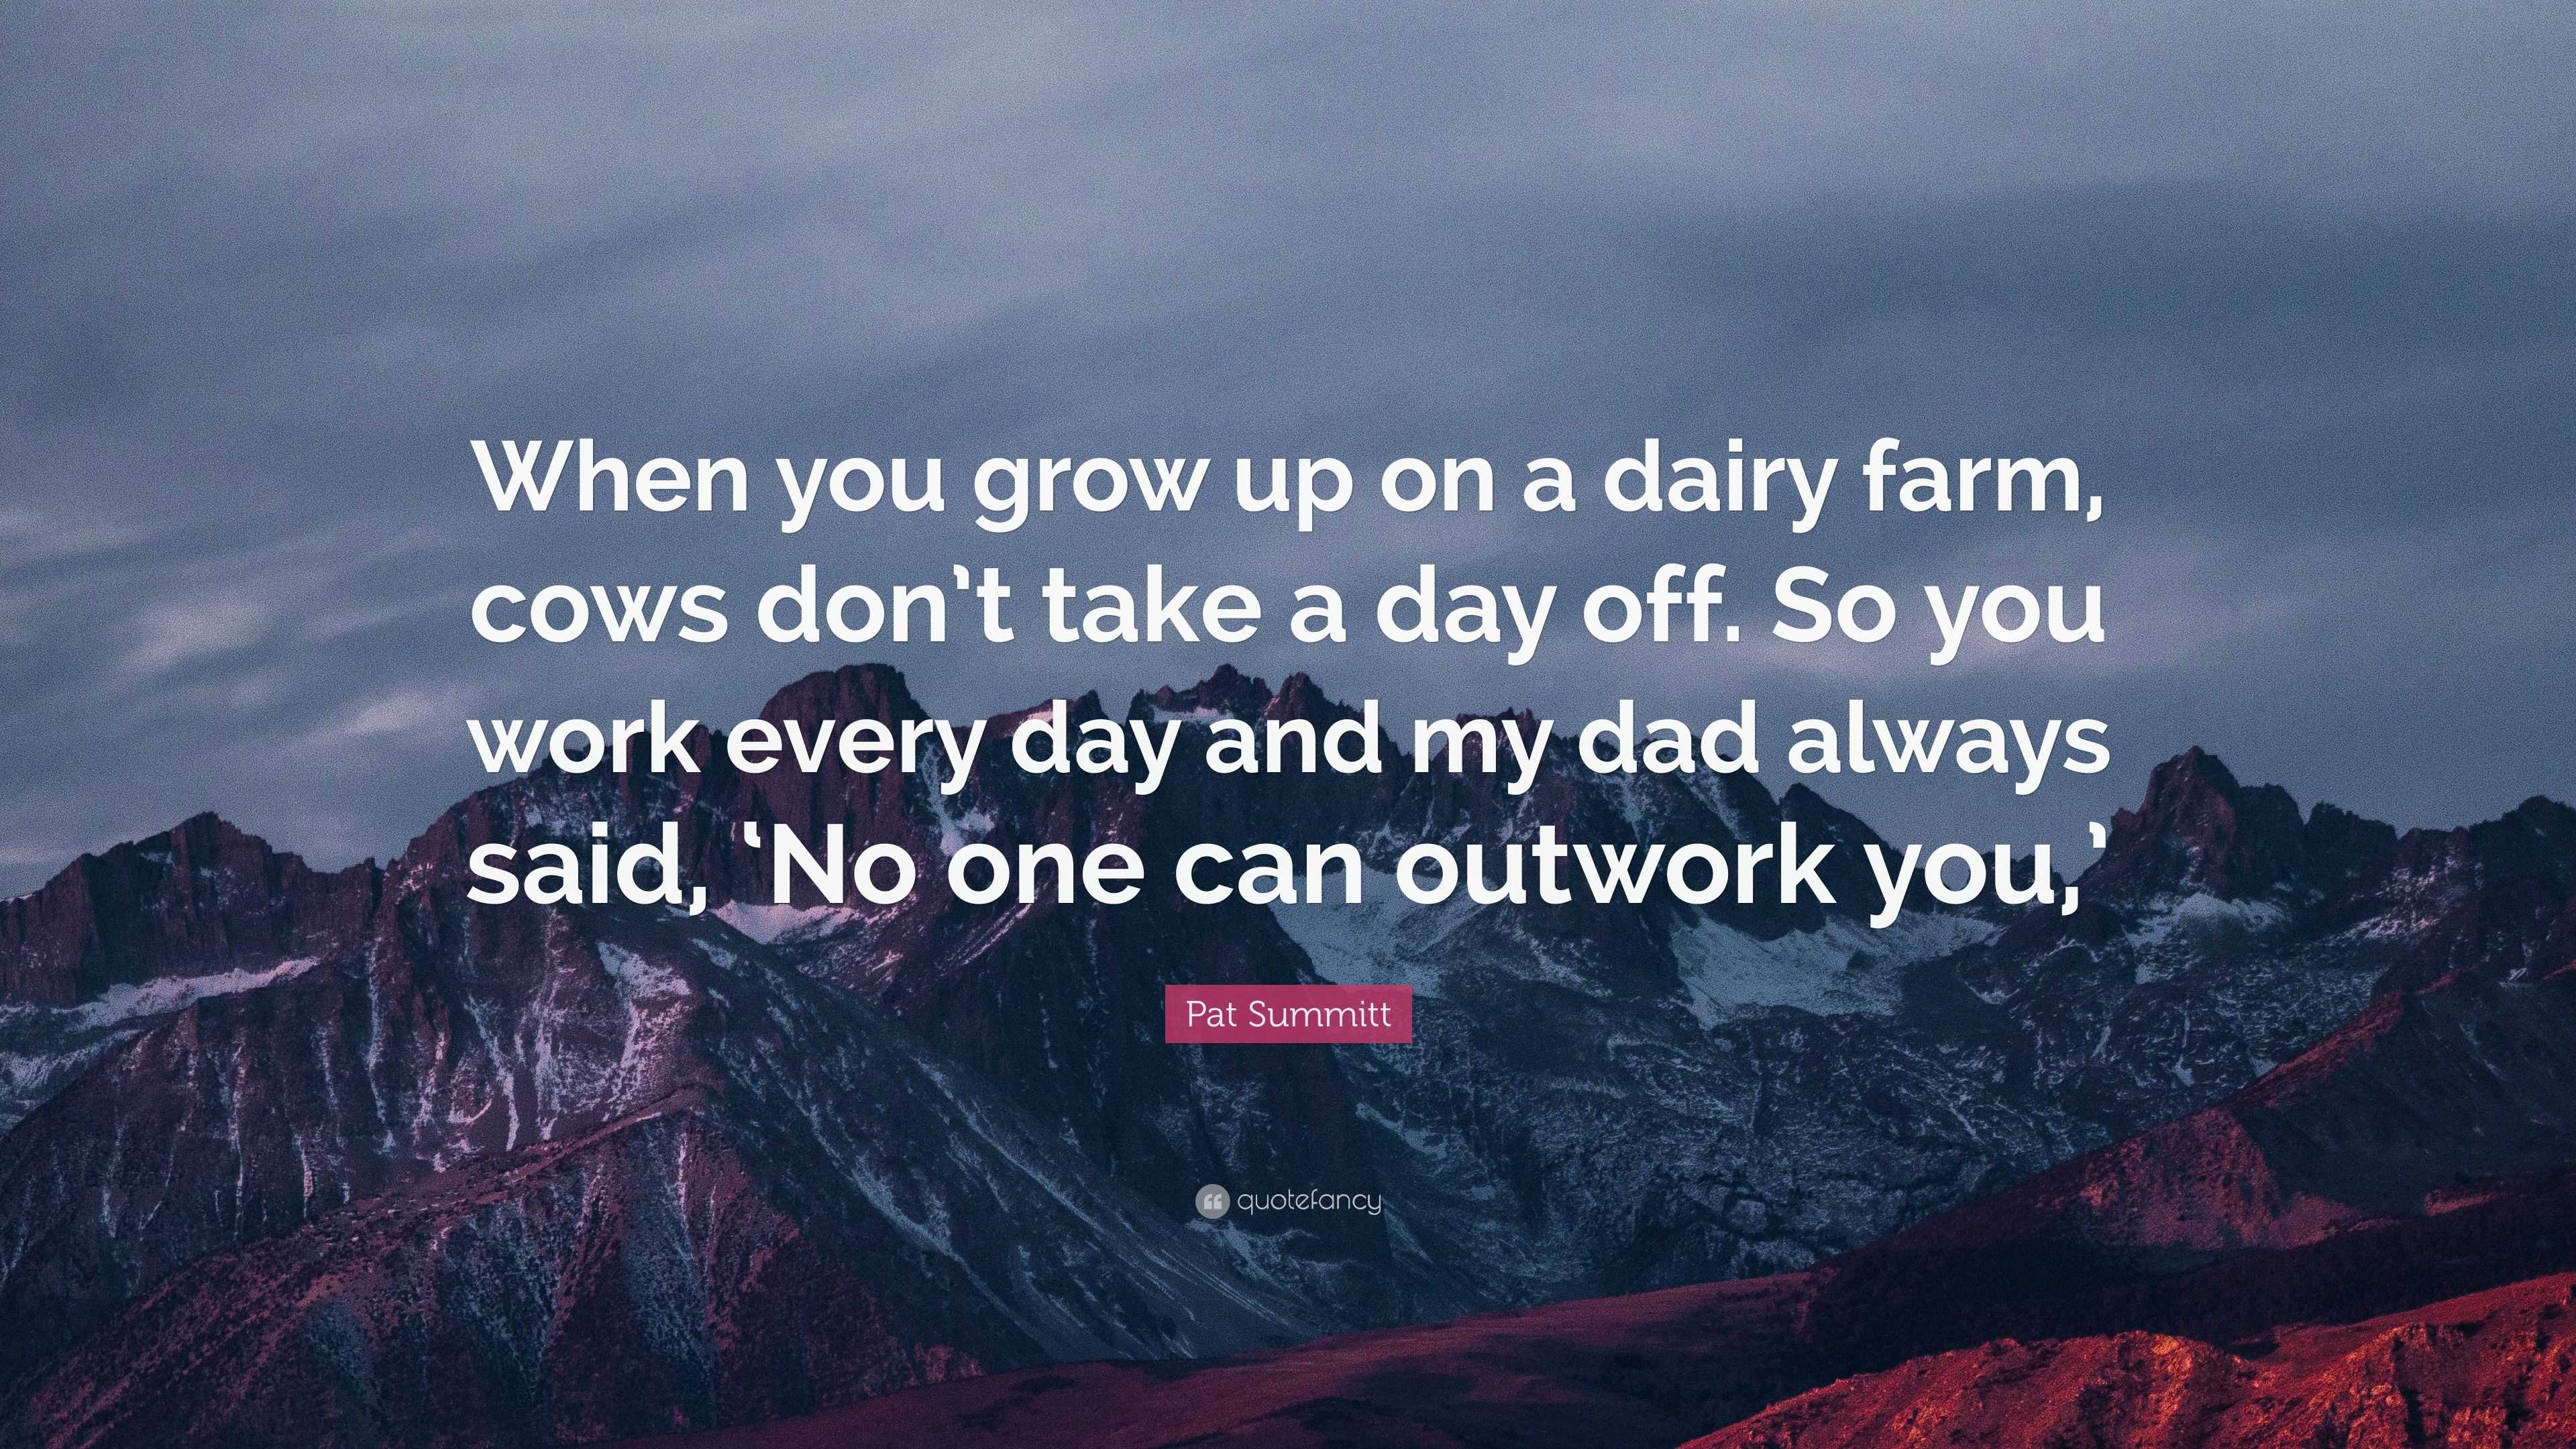 Pat Summitt Quote: “When you grow up on a dairy farm, cows don’t take a ...